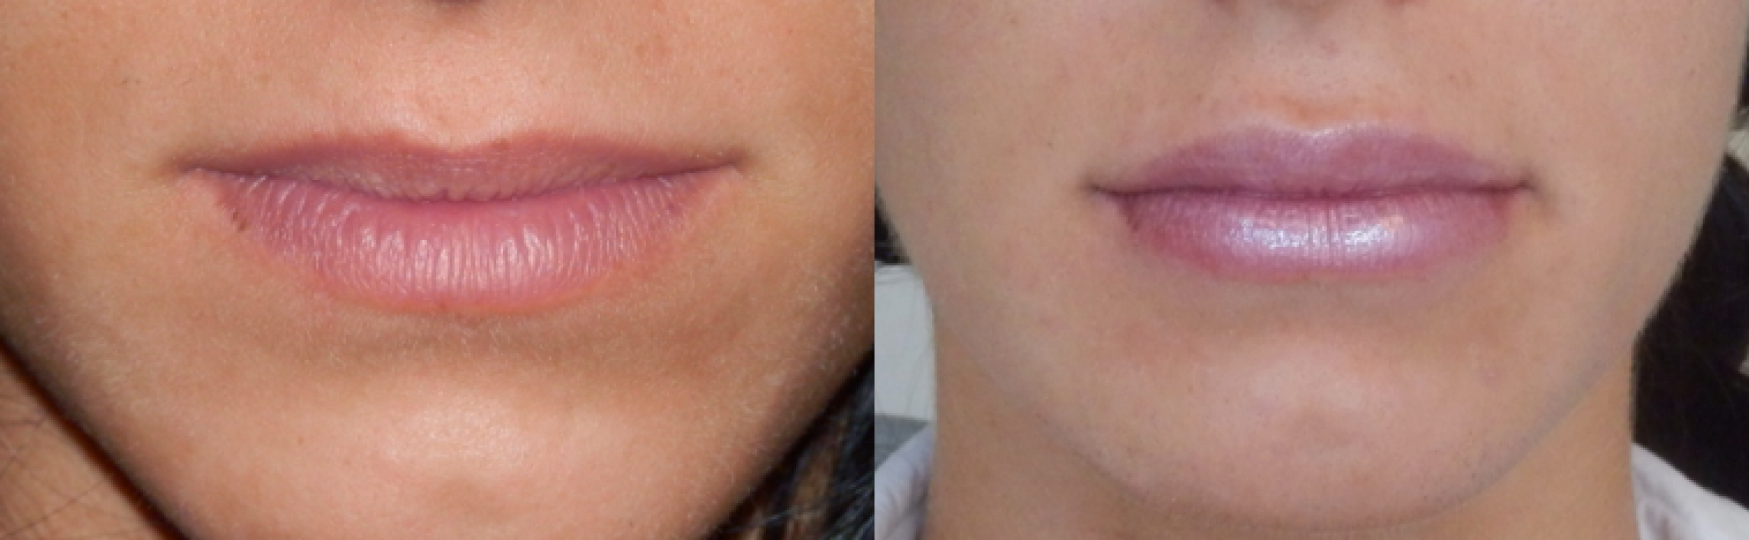 lips before and after treatment